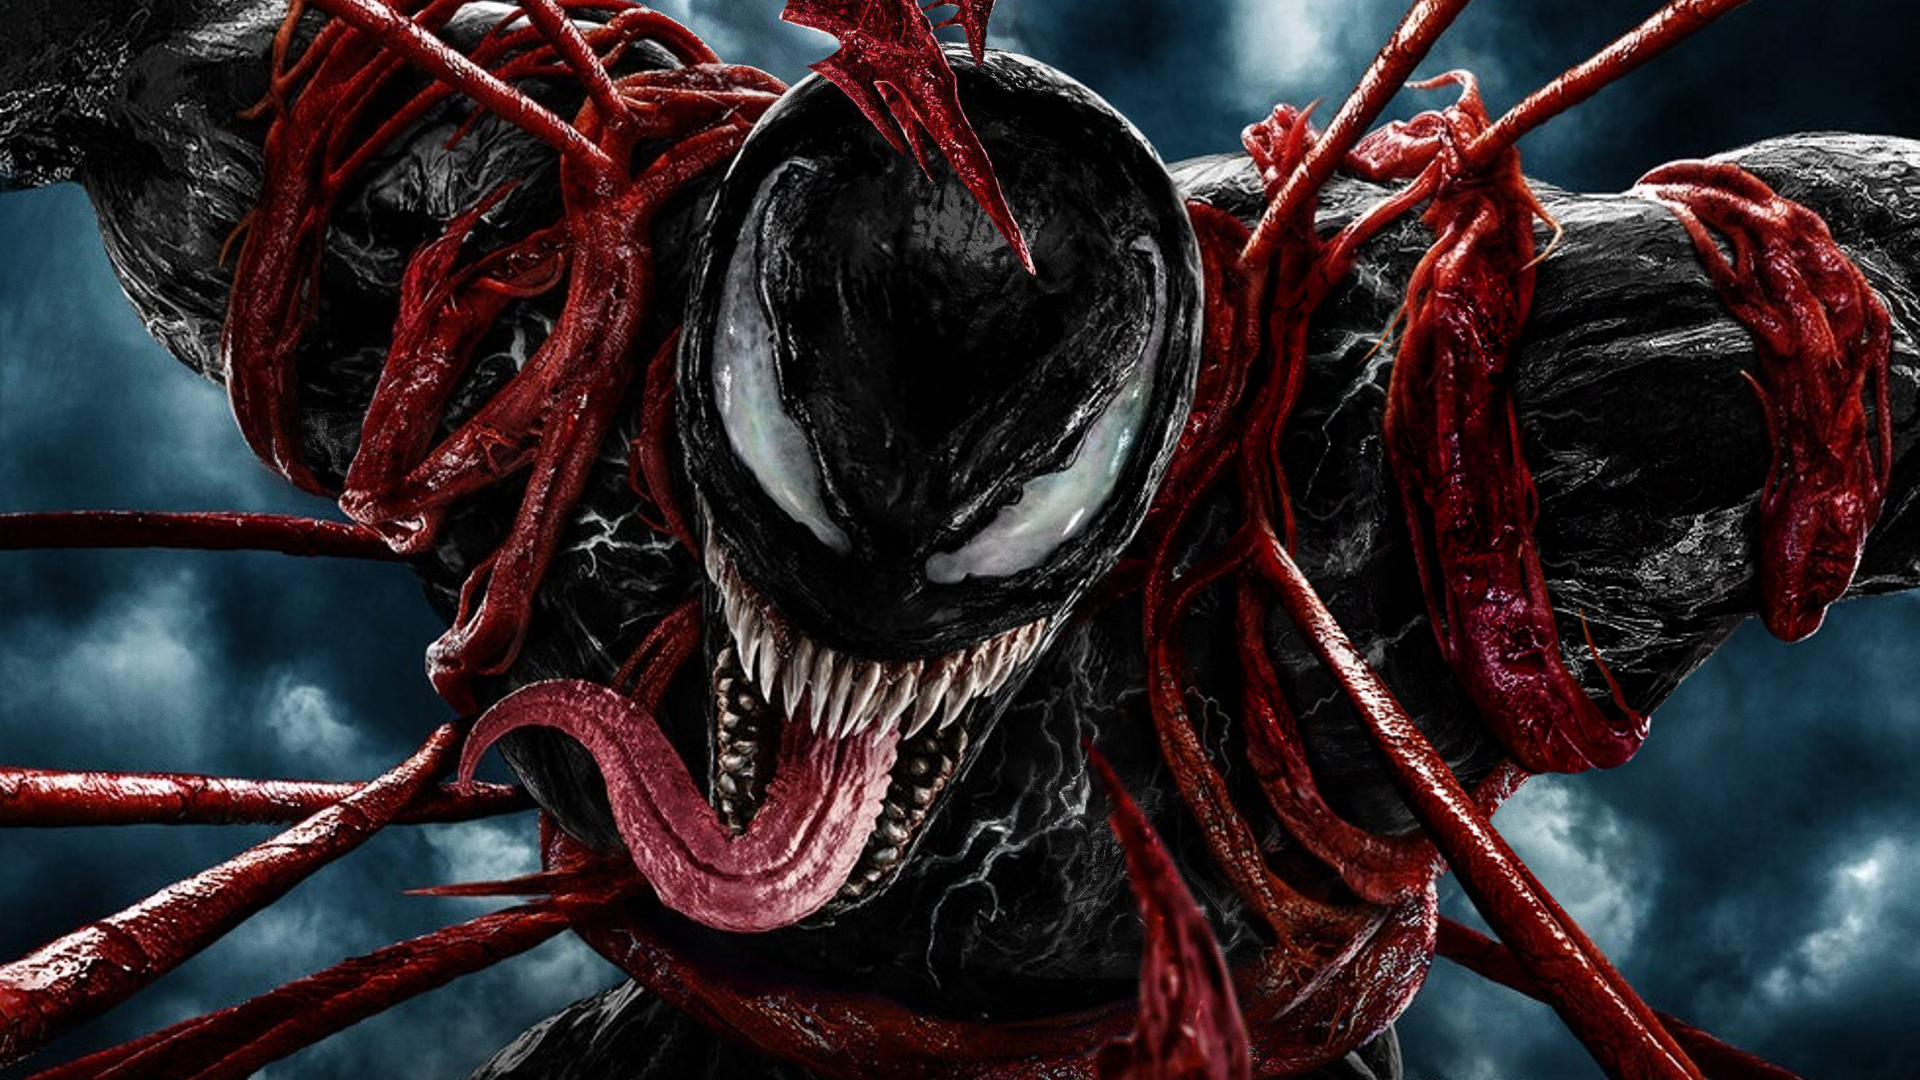 Carnage From Venom Let There Be Carnage Wallpapers